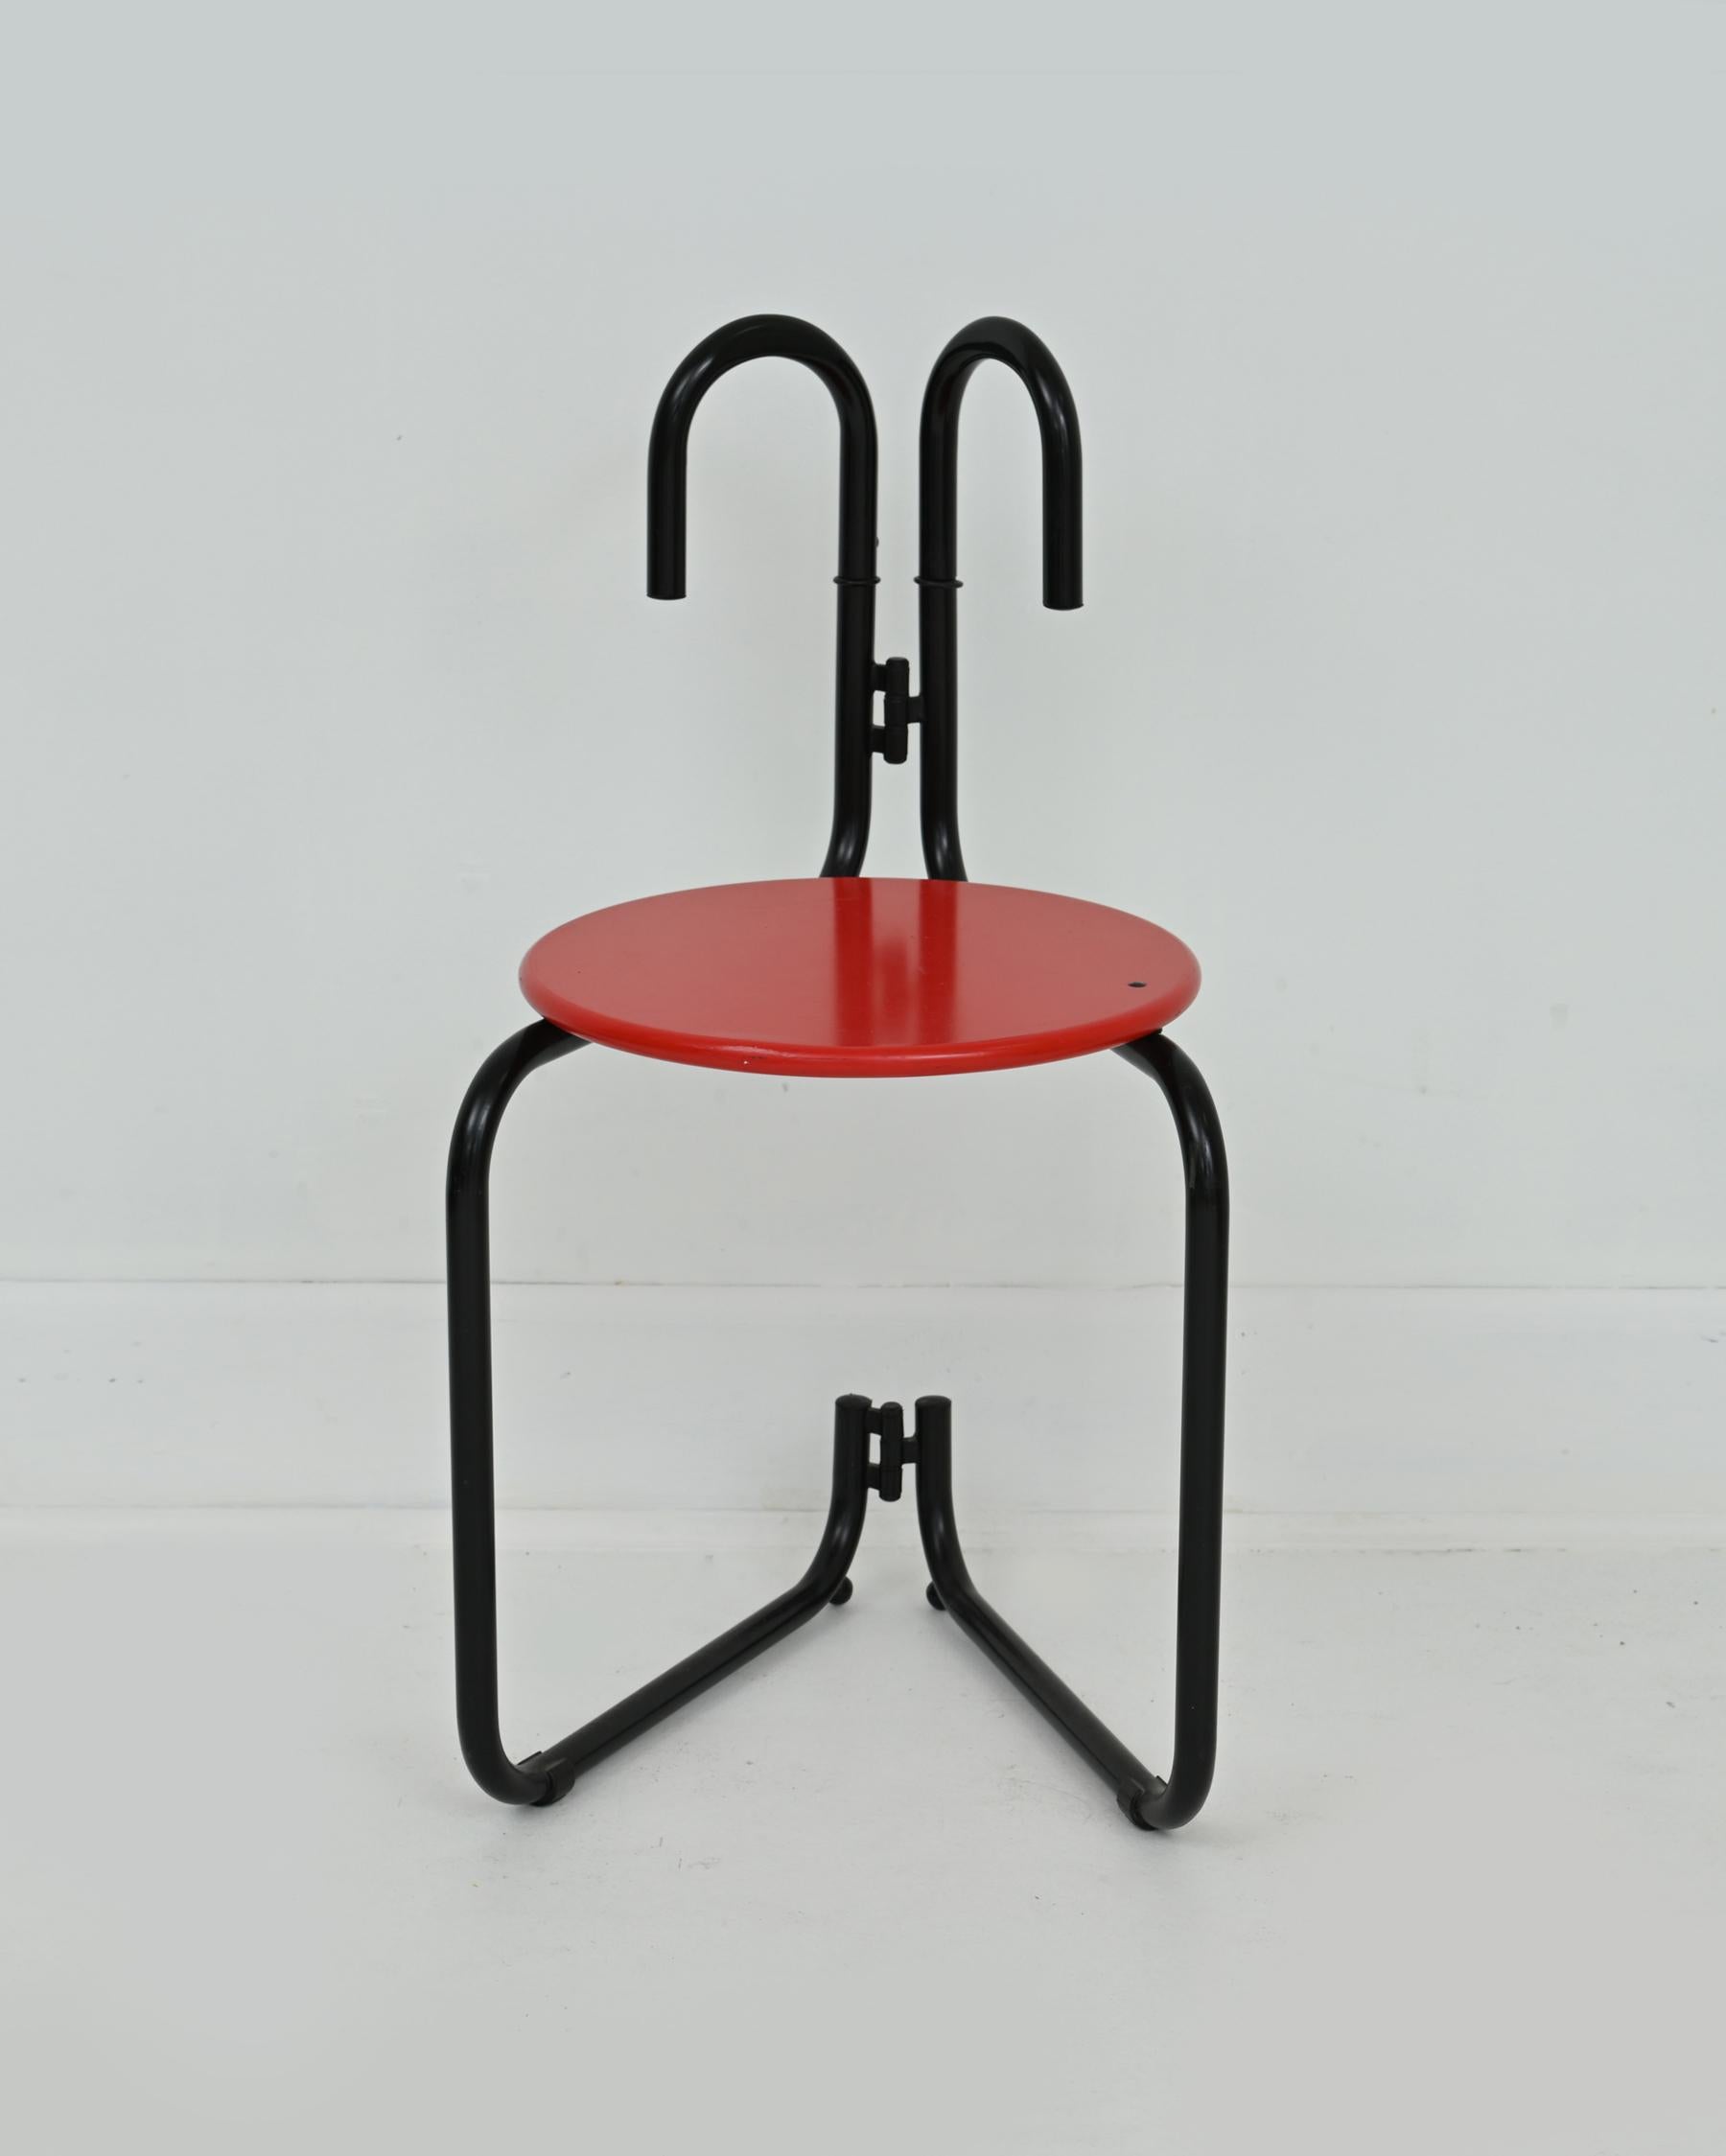 1980s folding postmodern chair by Luca Leonori, Laura de Lorenzo, and Stefano Stefani (the trio who formed Studio Grafite), for Pallucco, Italy. Made in Italy. The chair's handle folds in for a very ingenious design.
 